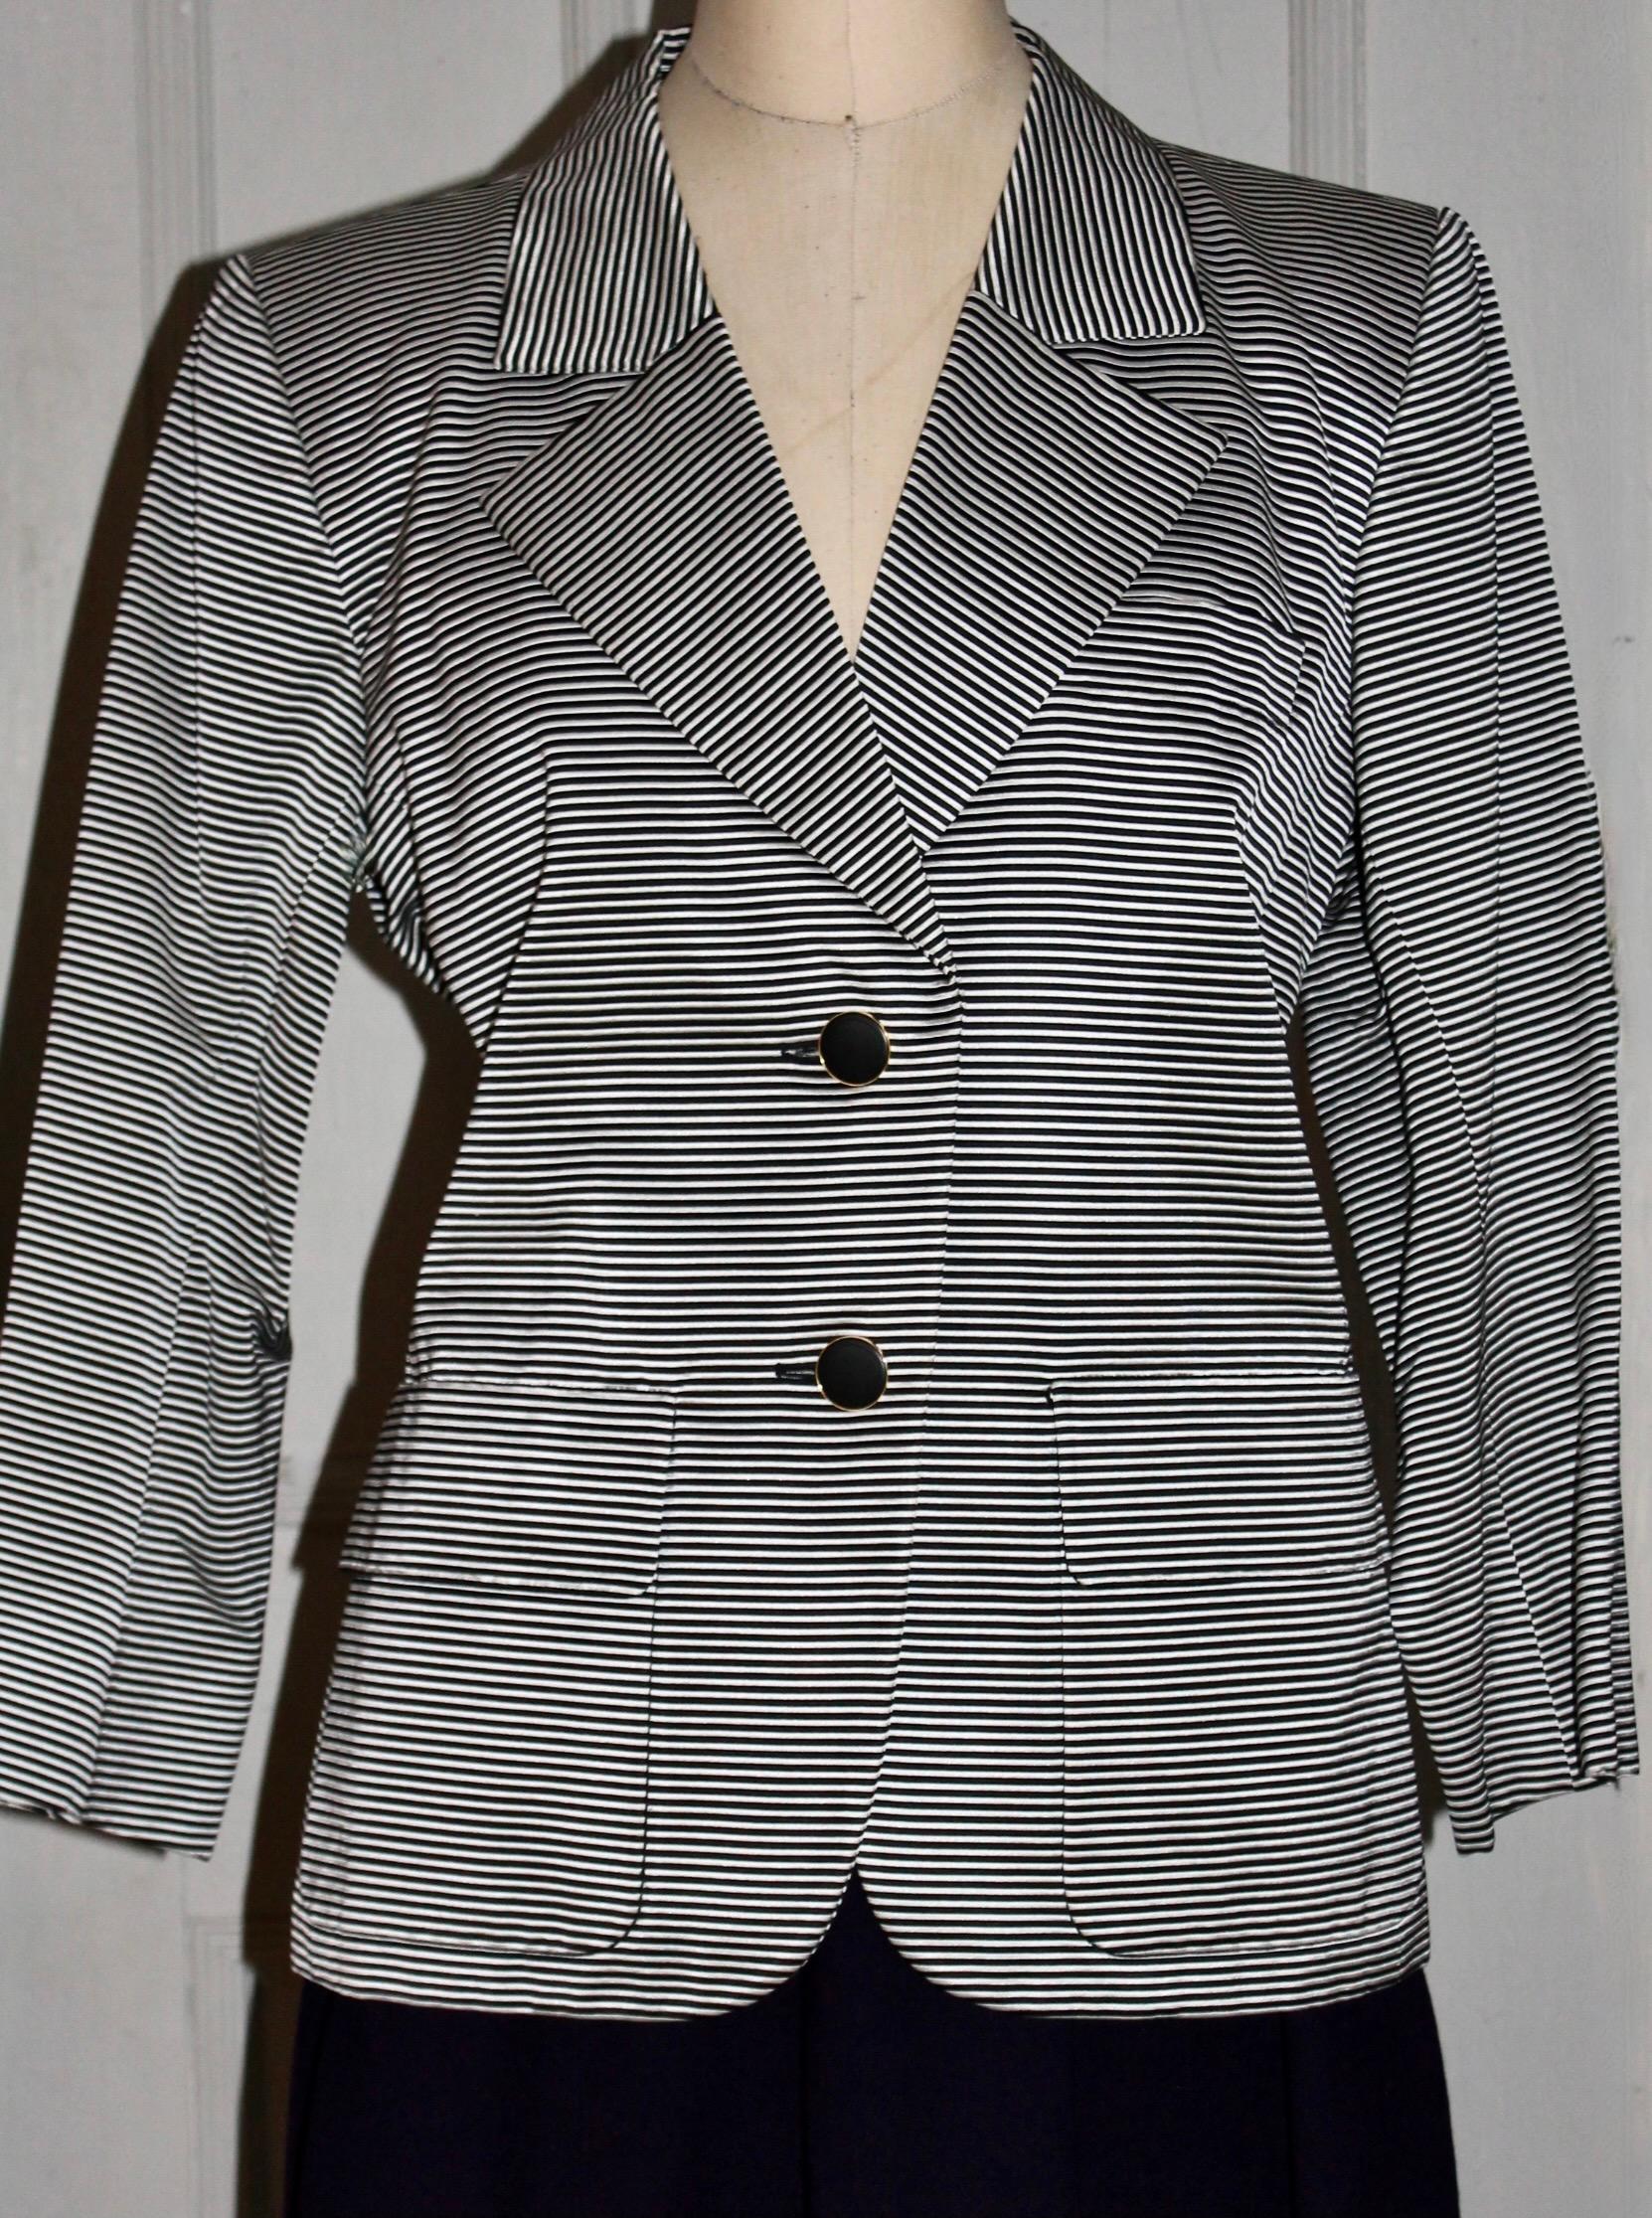 Yves Saint Laurent Rive Gauche Black/White Pin Striped Jacket In Excellent Condition For Sale In Sharon, CT